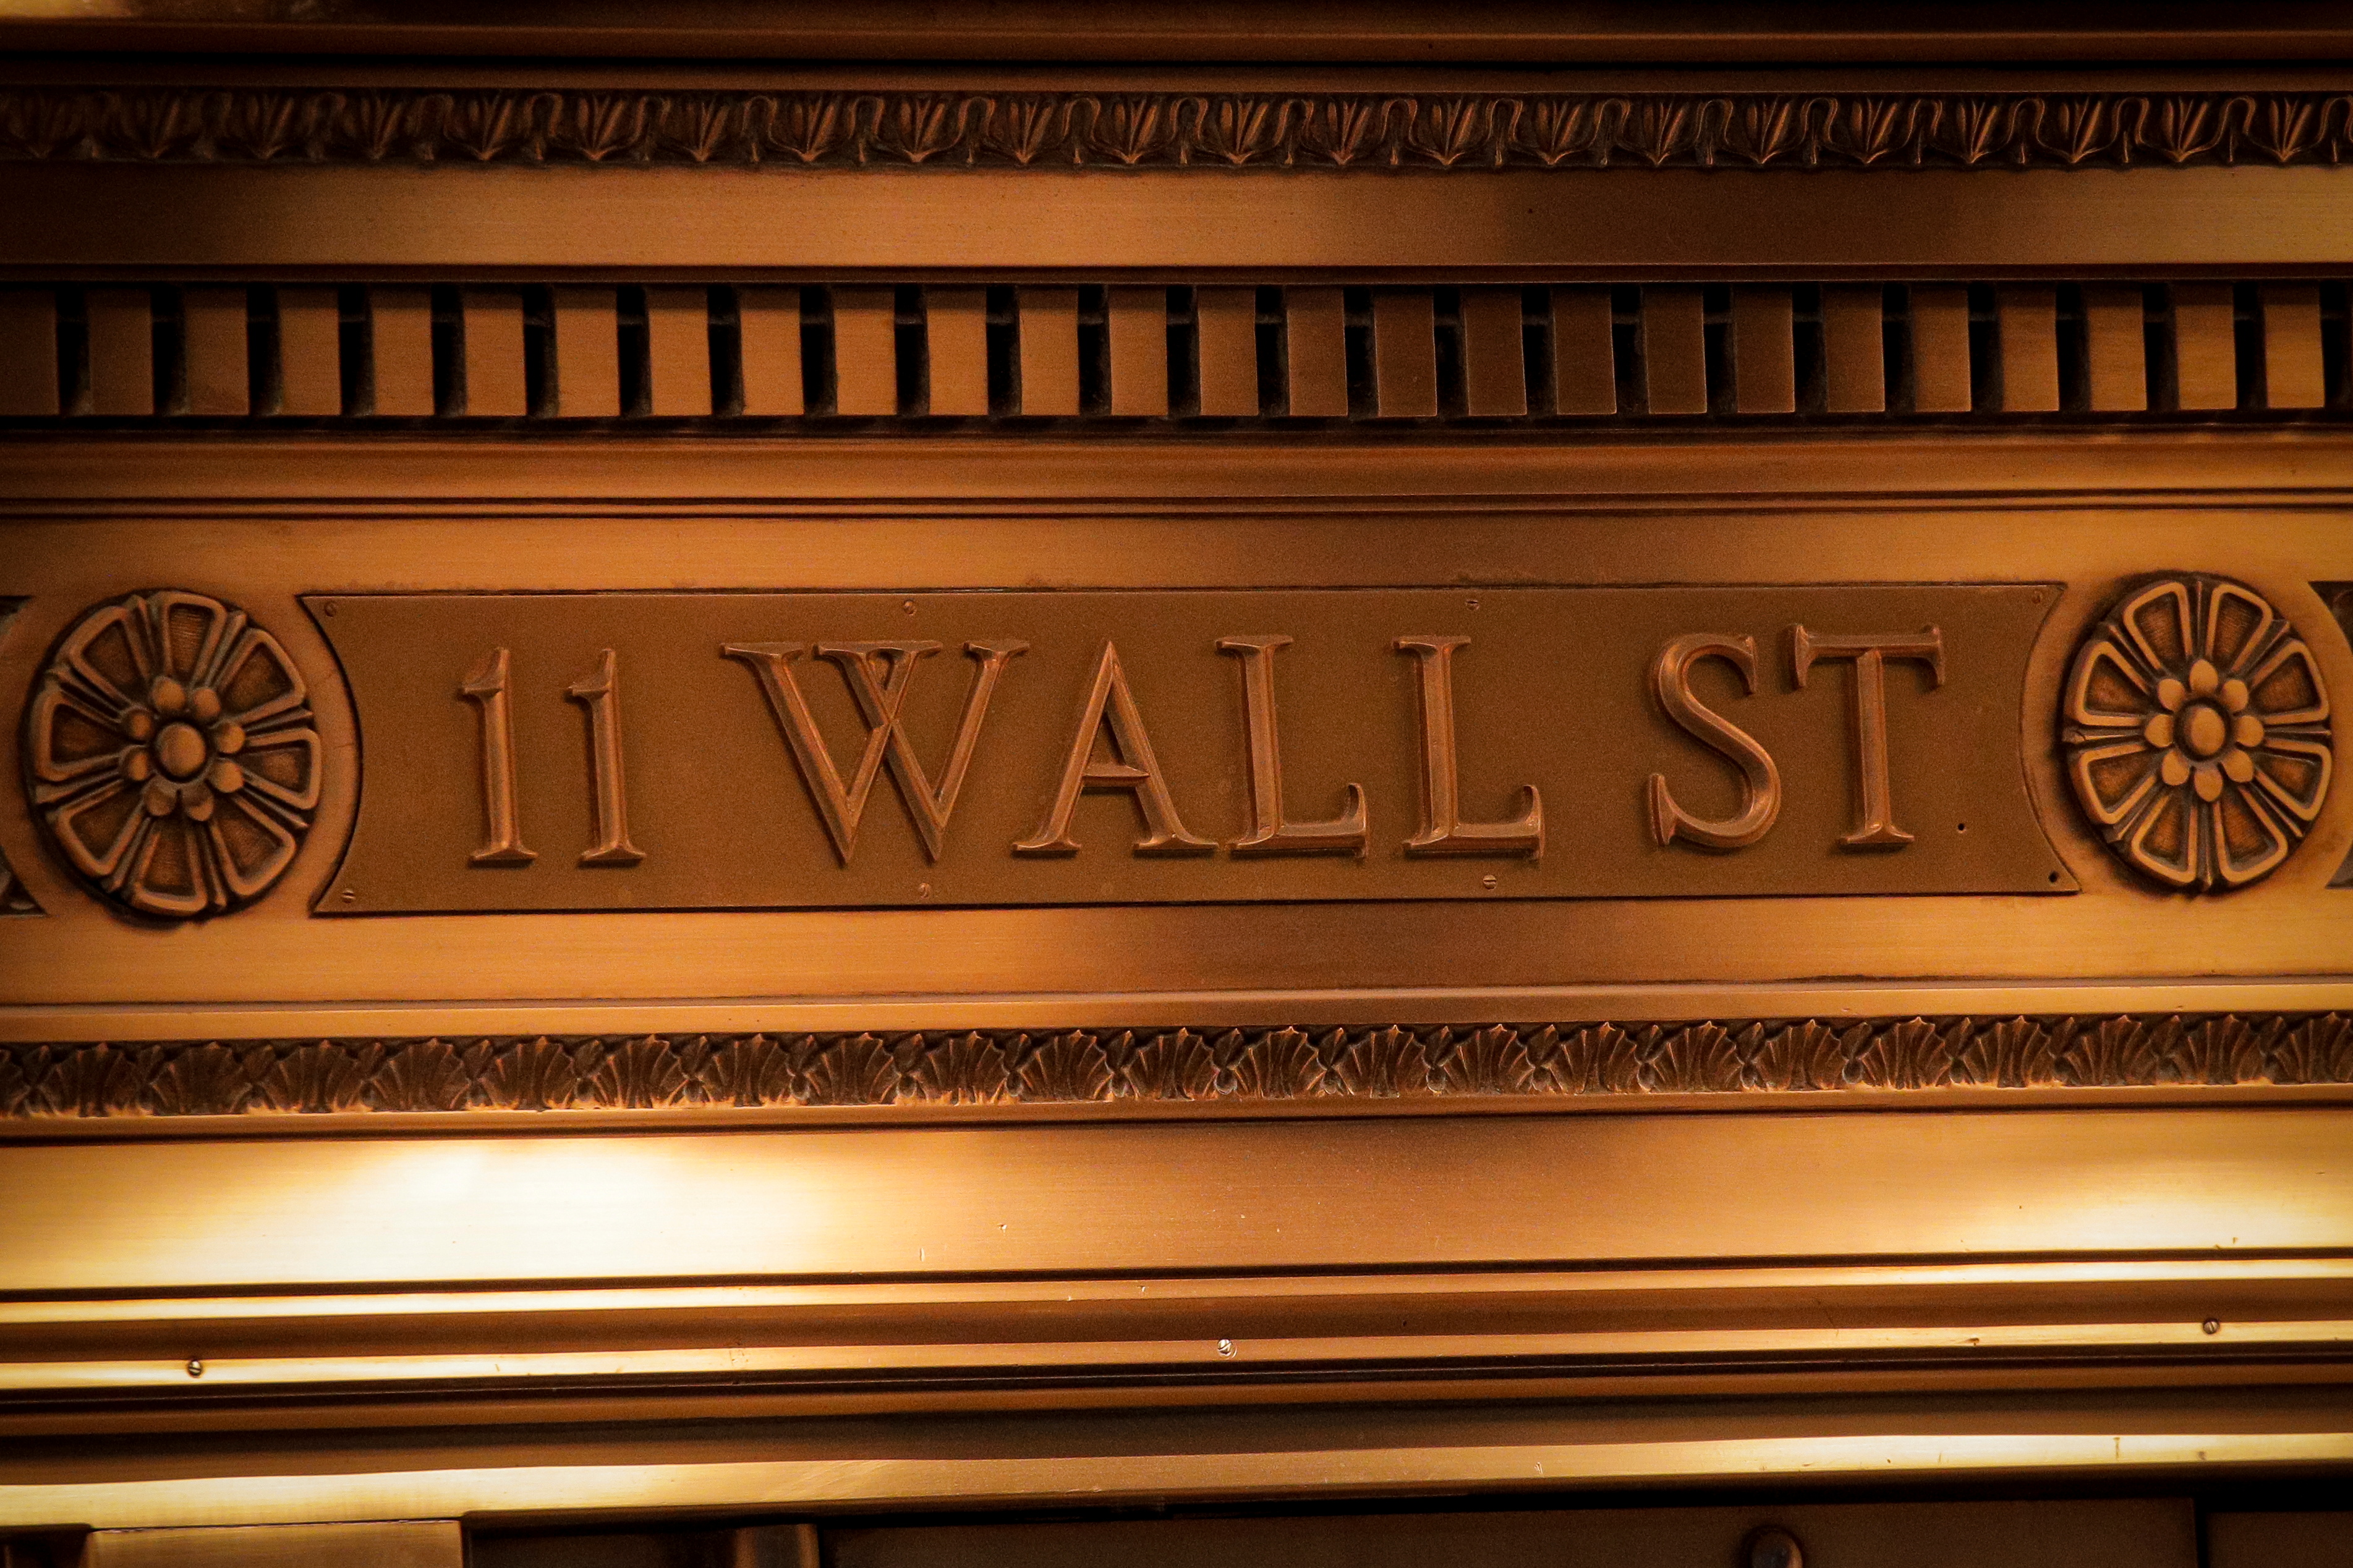 A sign is seen outside the 11 Wall St. entrance of the NYSE in New York